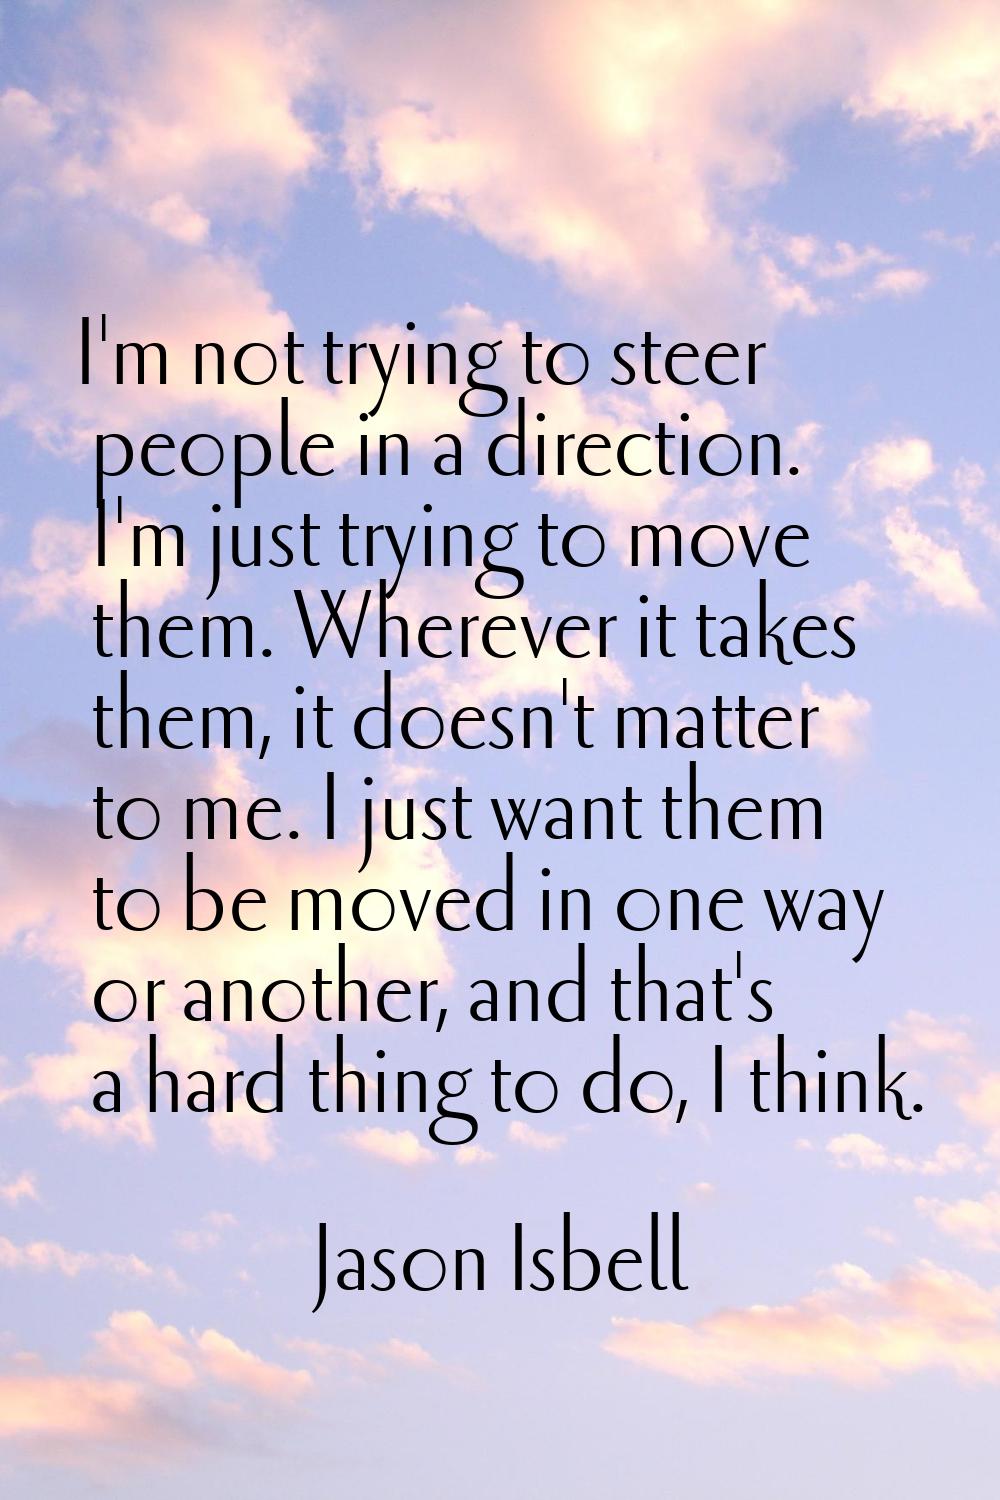 I'm not trying to steer people in a direction. I'm just trying to move them. Wherever it takes them